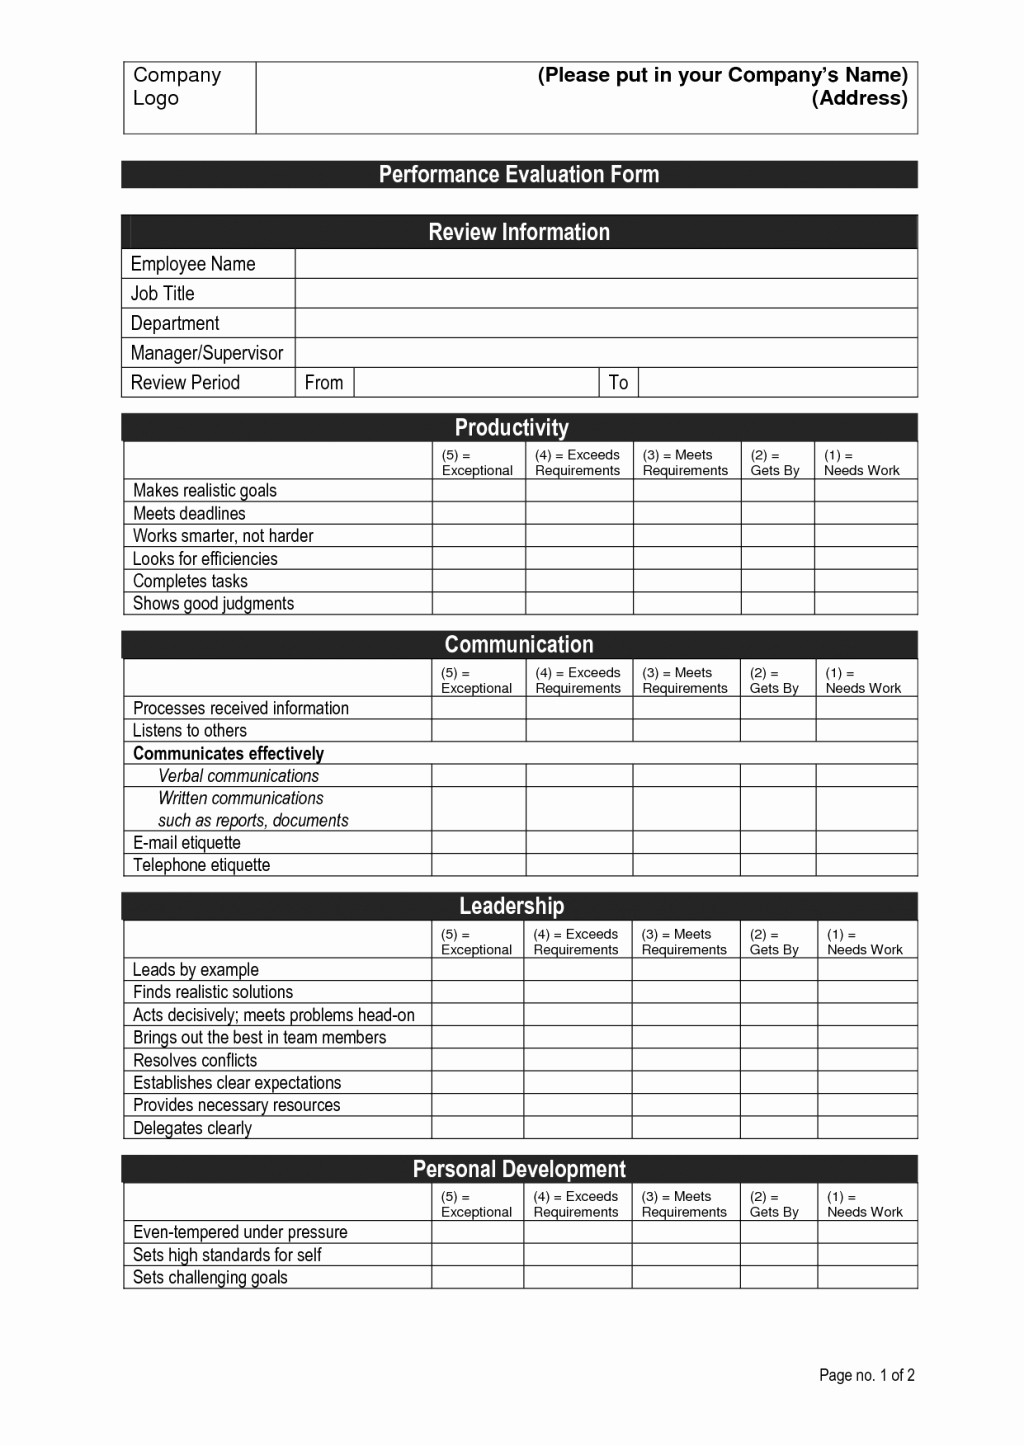 Documenting Employee Performance Template New Employee Performance Review Template Doc Evaluation form